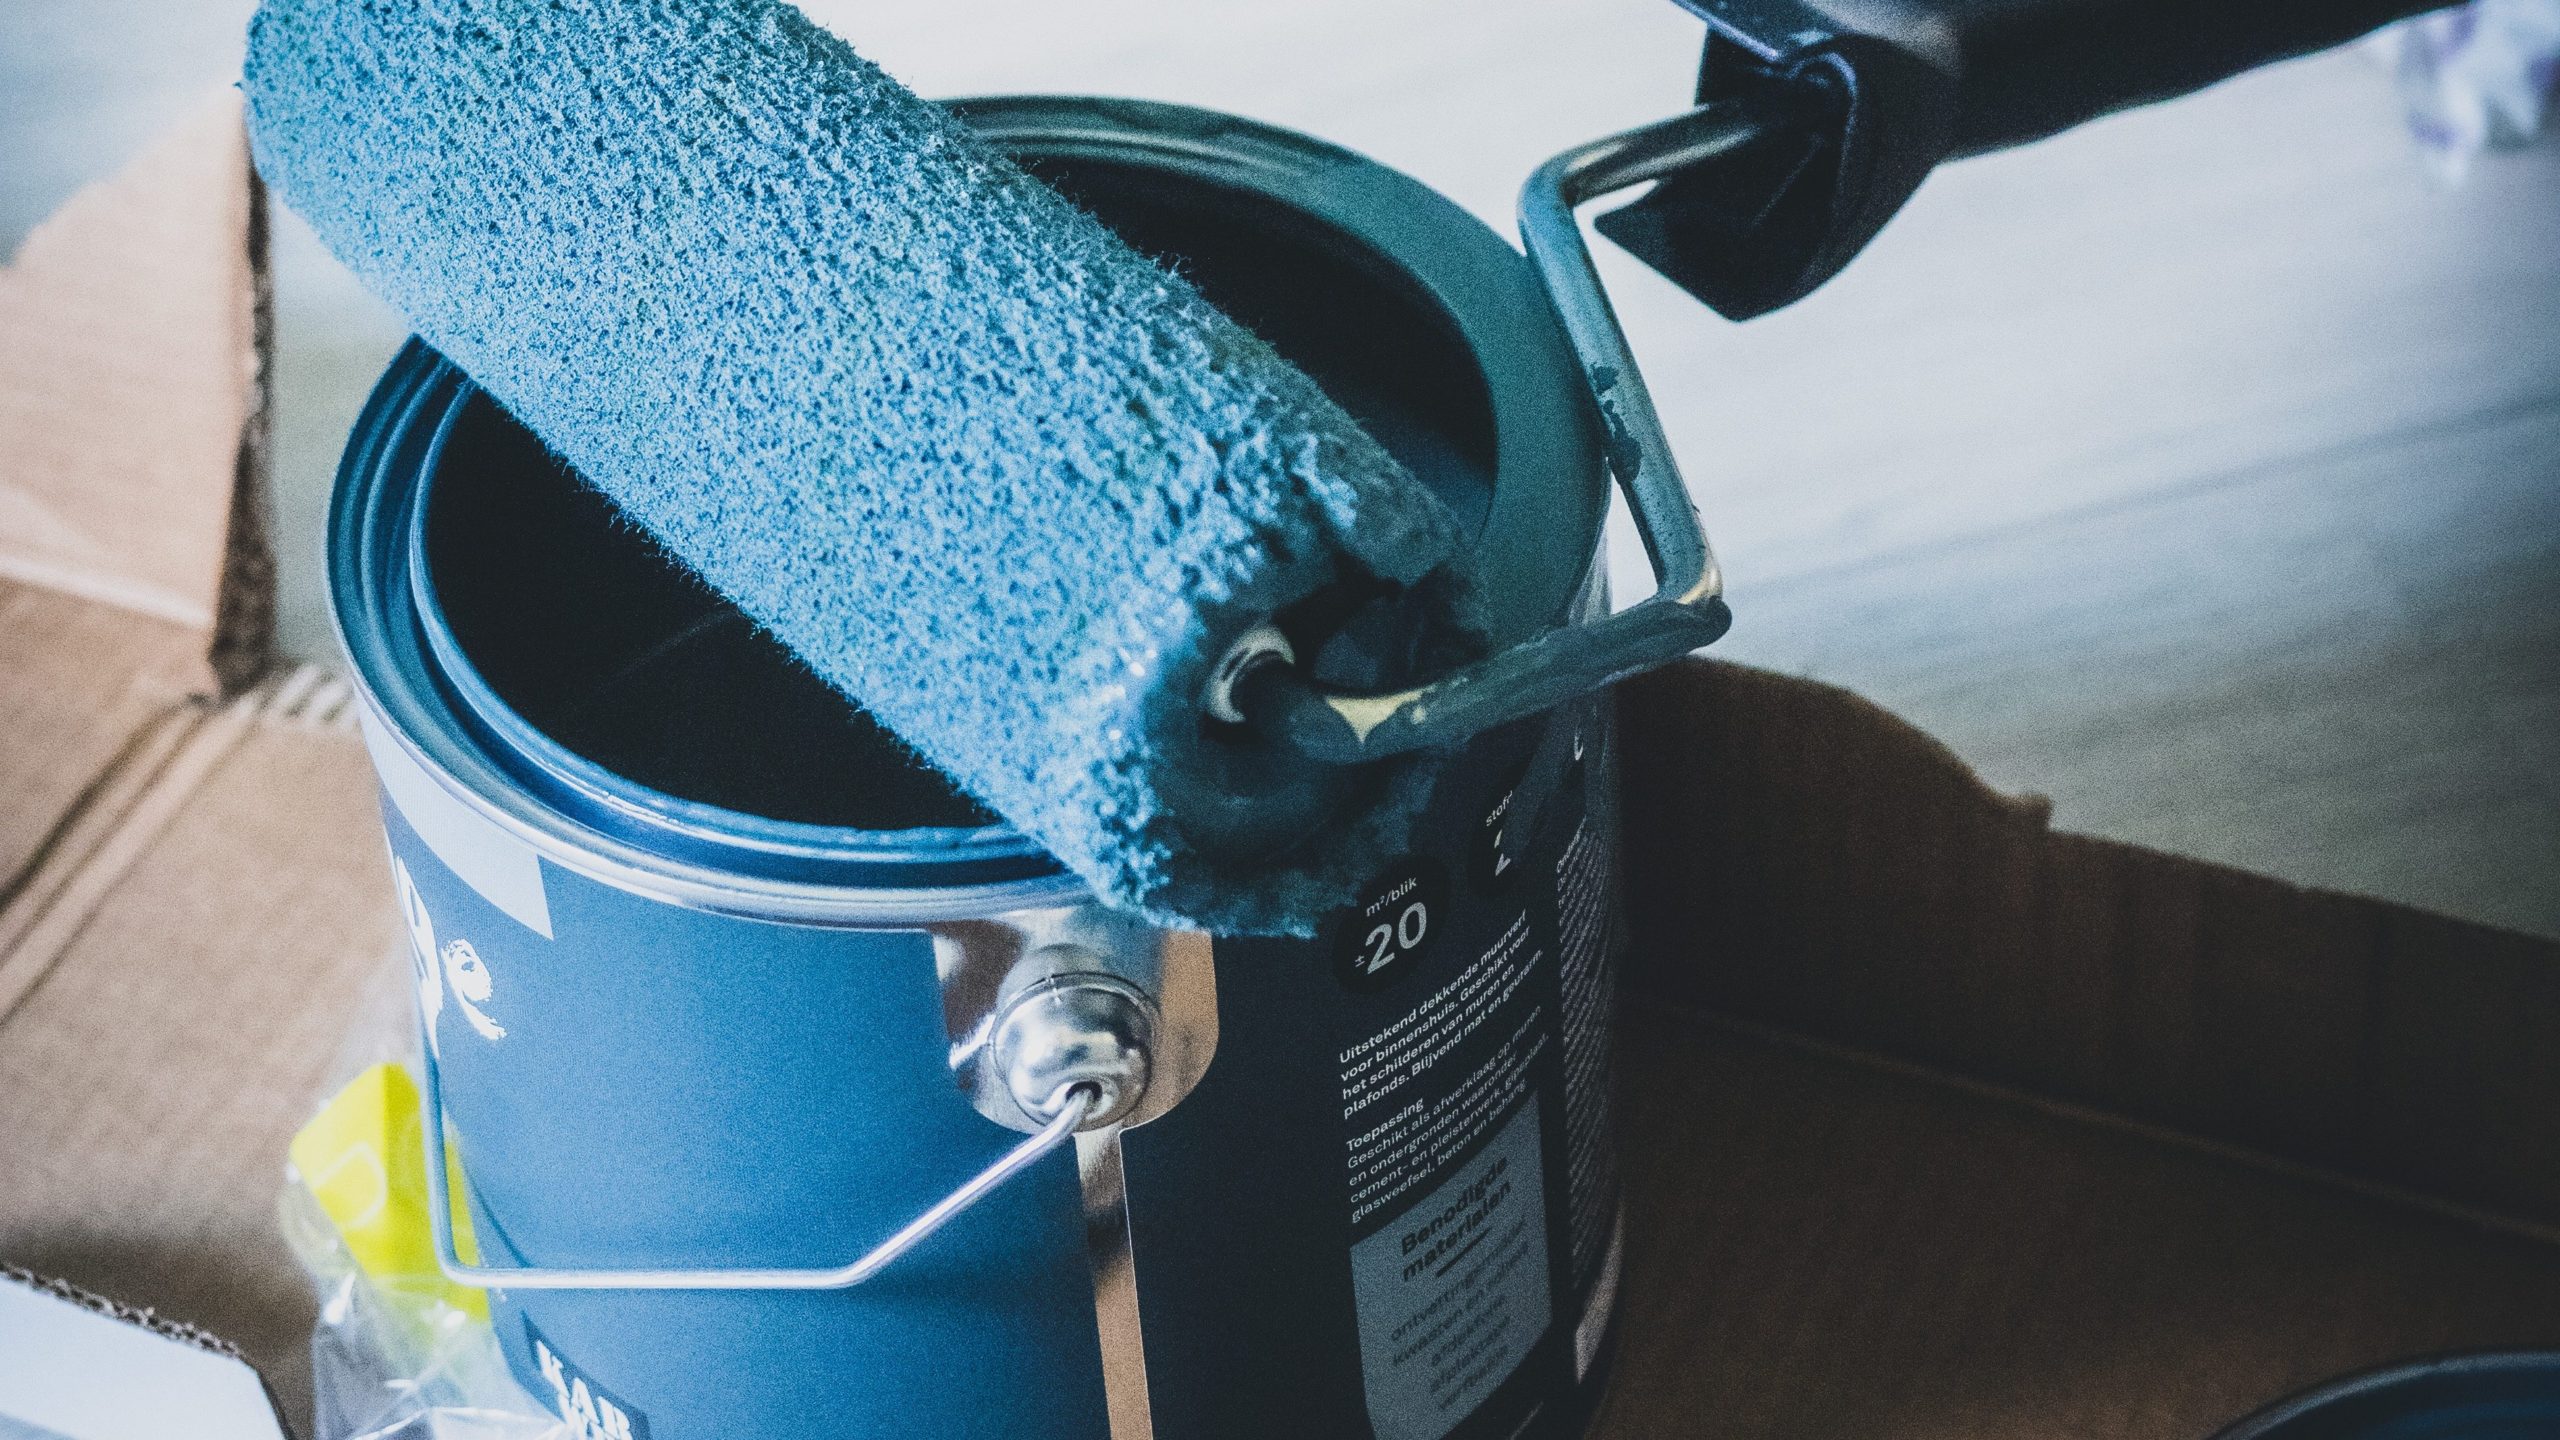 a paint can with a roller sitting on it, used to illustrate the Volatile Organic Compounds that evaporate out of drying paints and finishes.